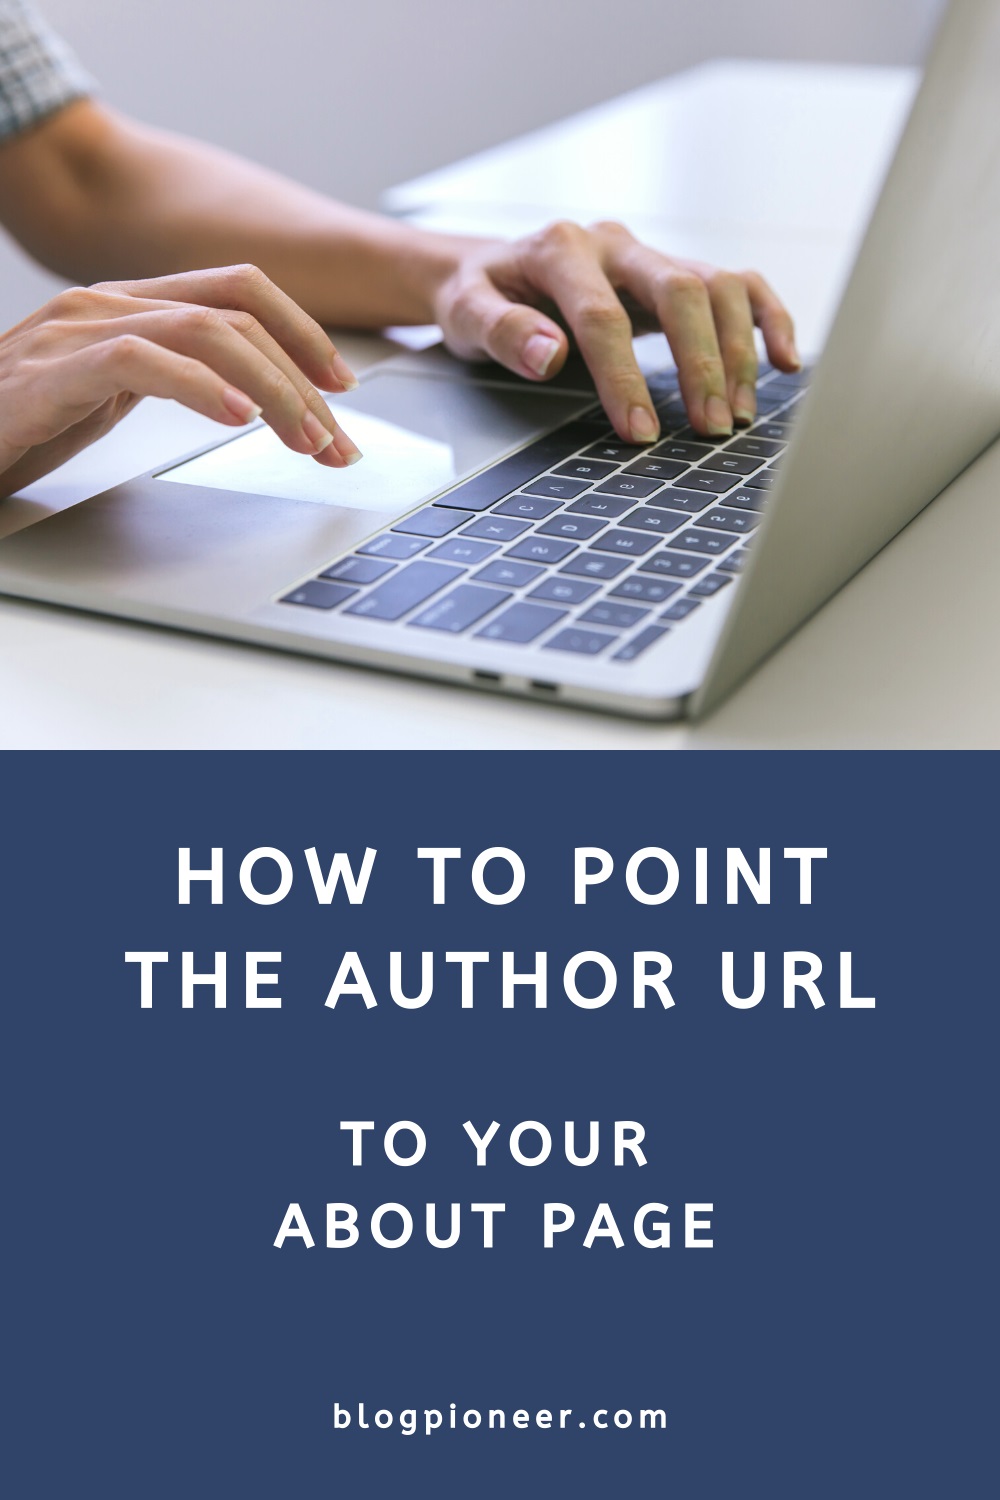 How to redirect author archives URL to about page